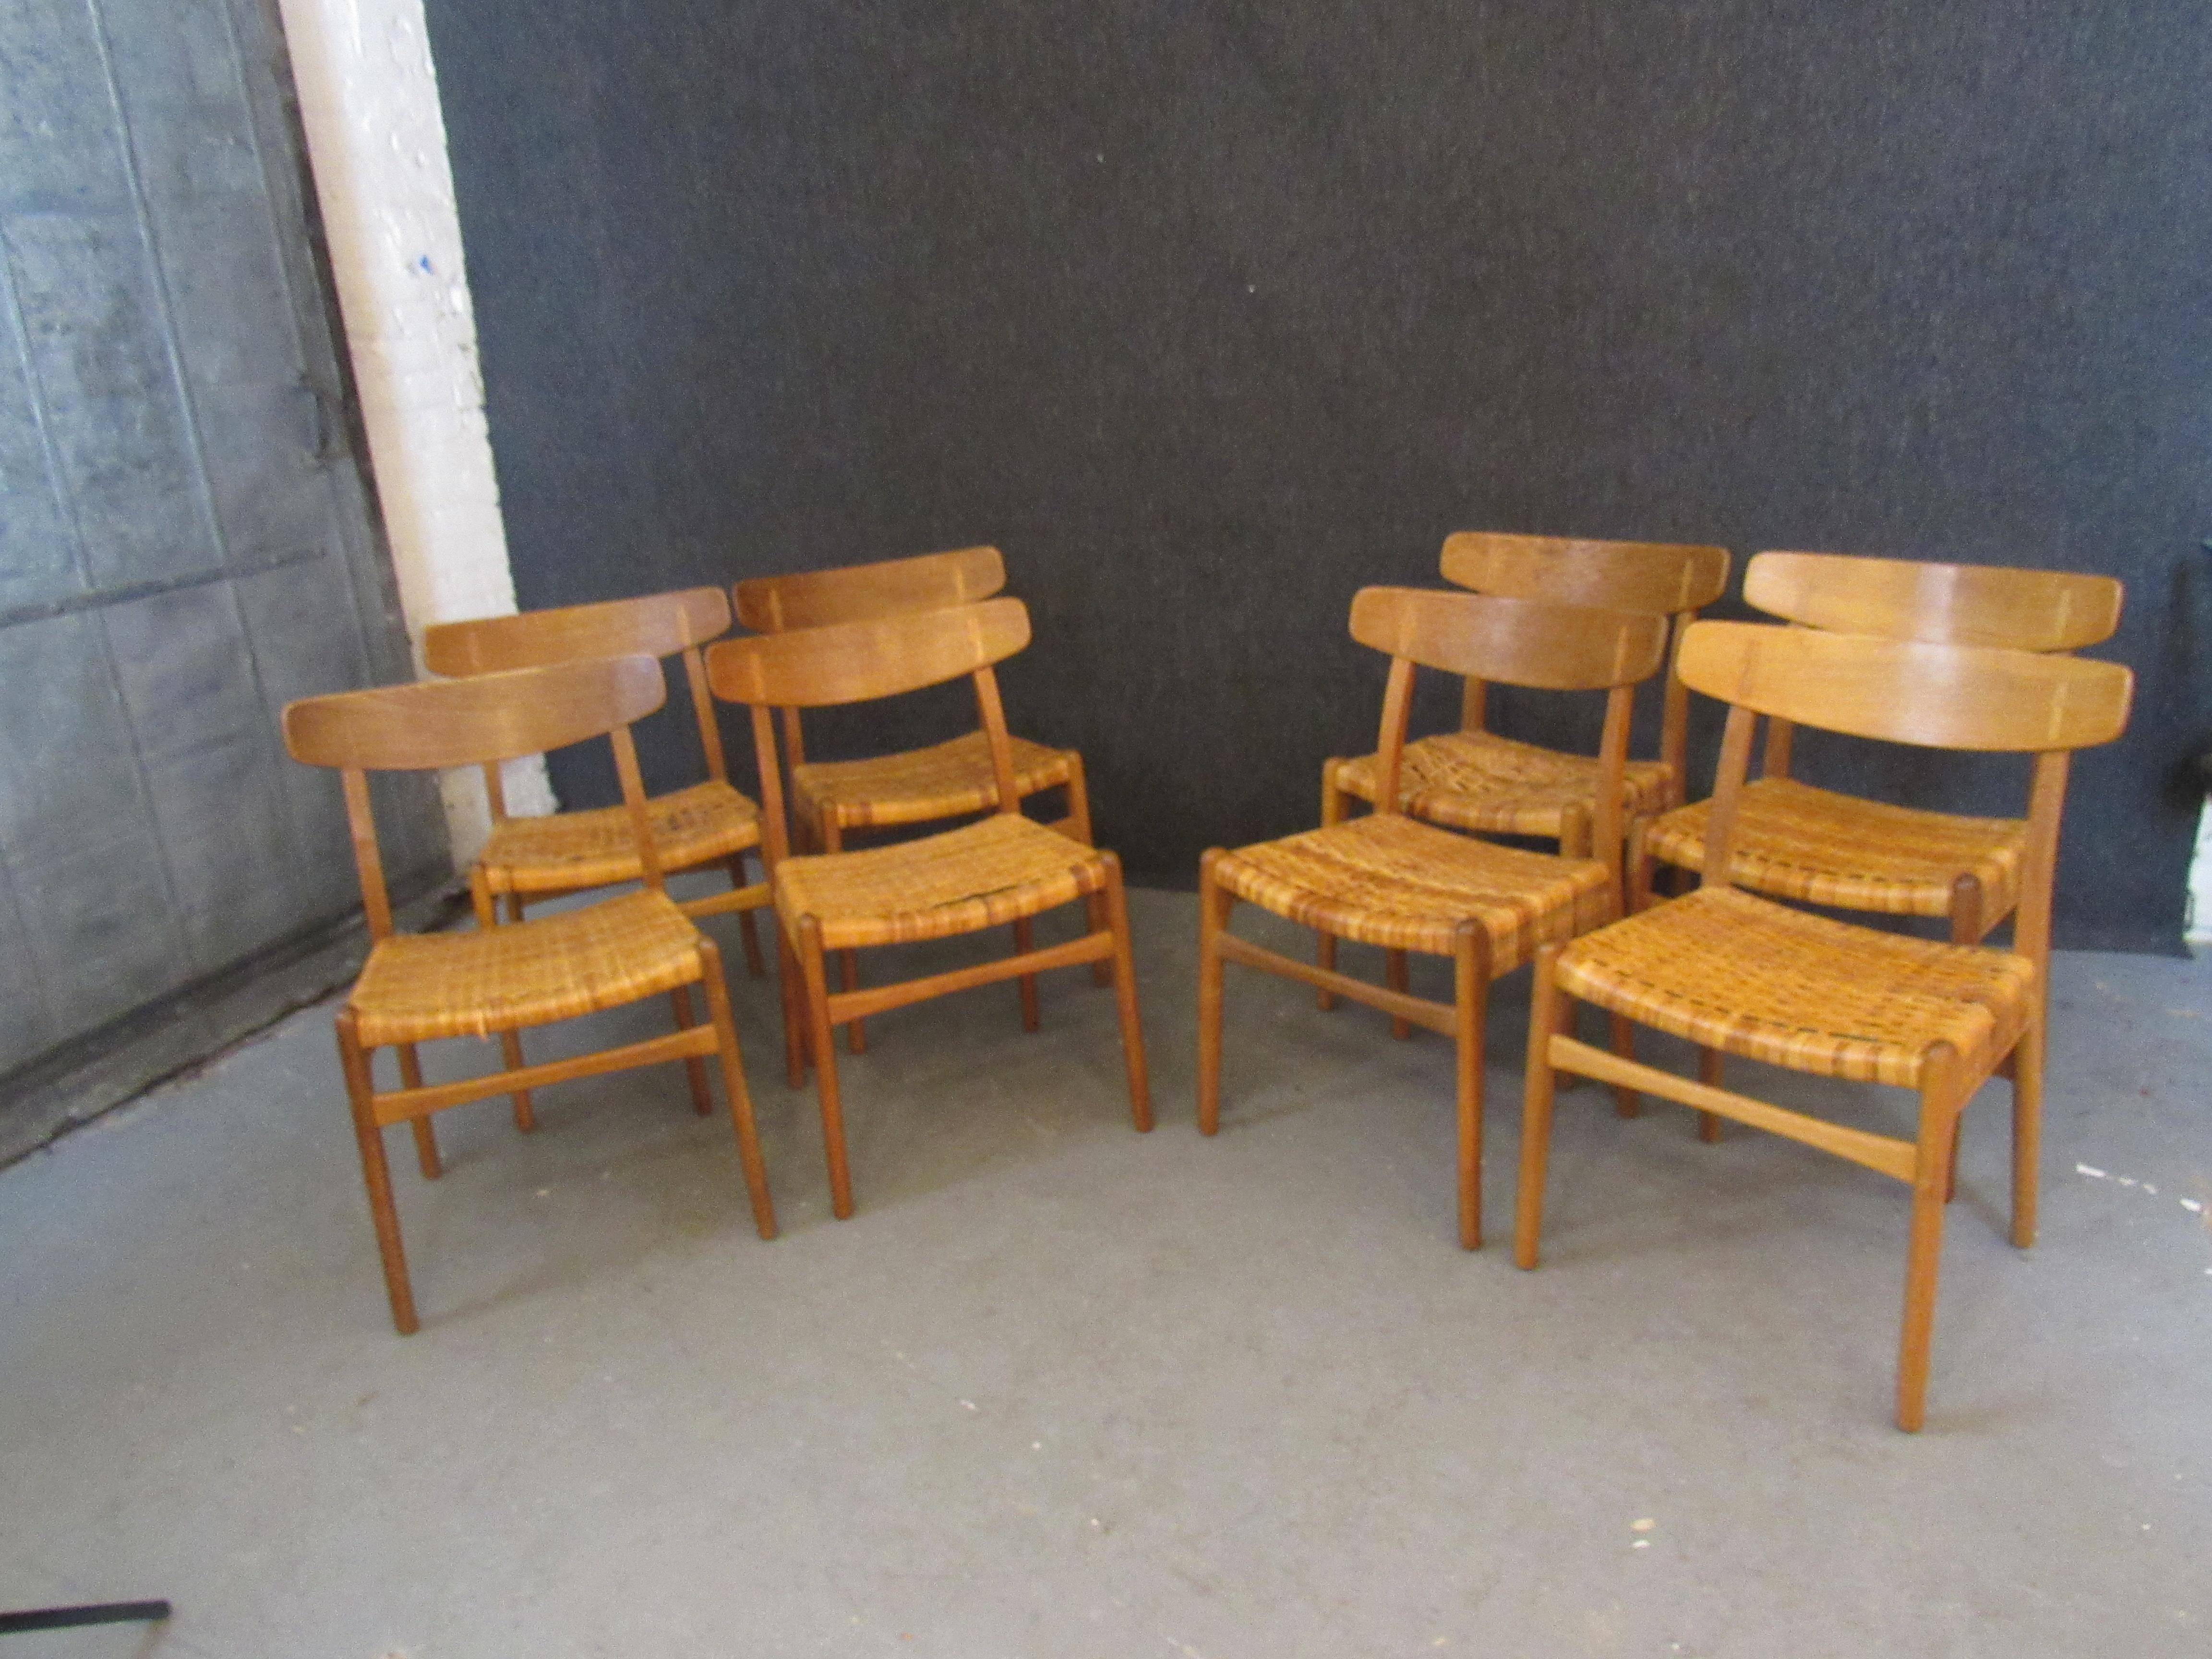 Bring home the authentic mid-century modern Danish furniture that has become the envy of the design world with this exquisite set of original Hans Wegner CH-23 oak & rattan dining chairs. A lovely oak wood grain is highlighted with a satin oil